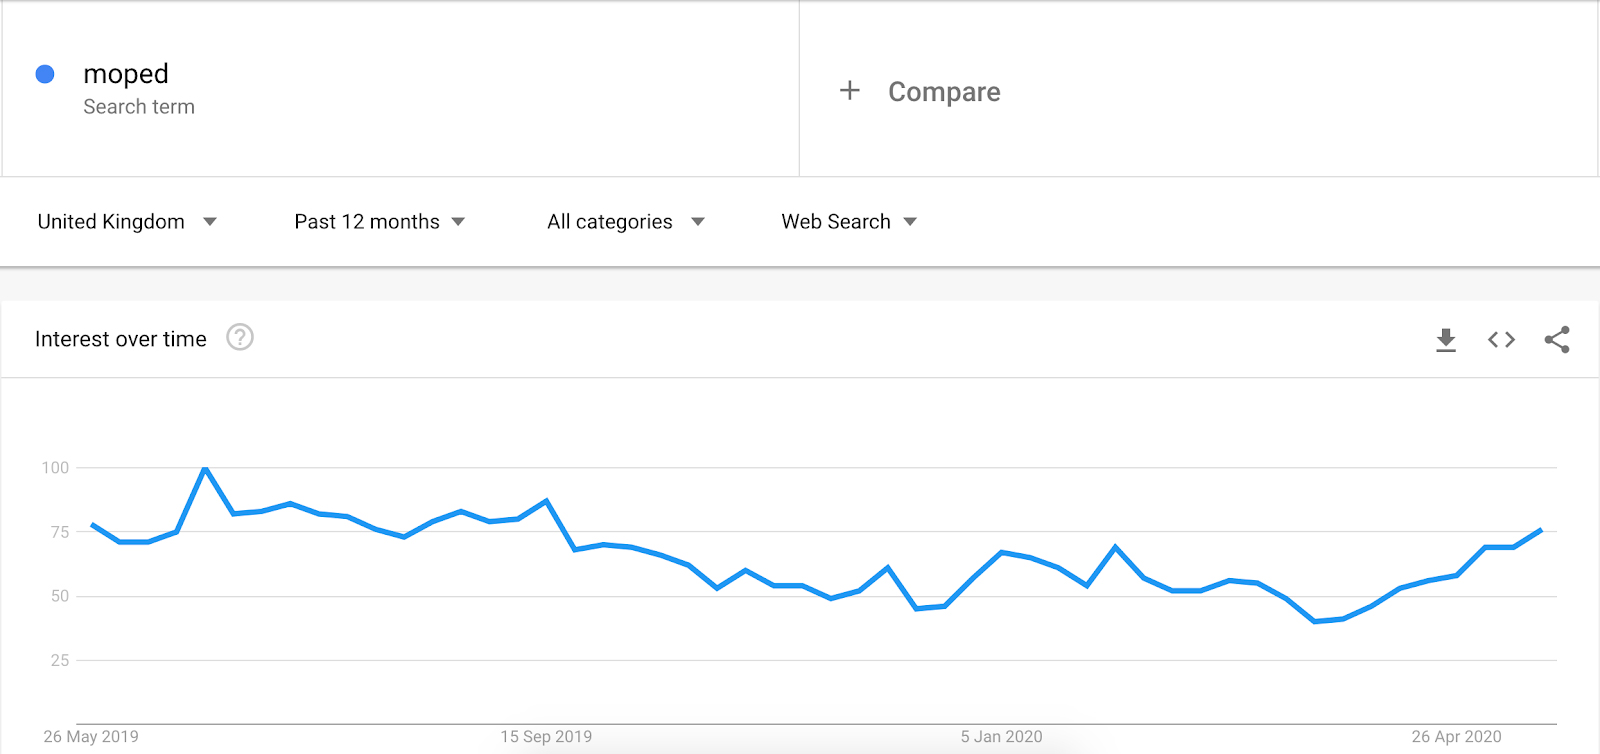 Google Trends data for searches of “moped”